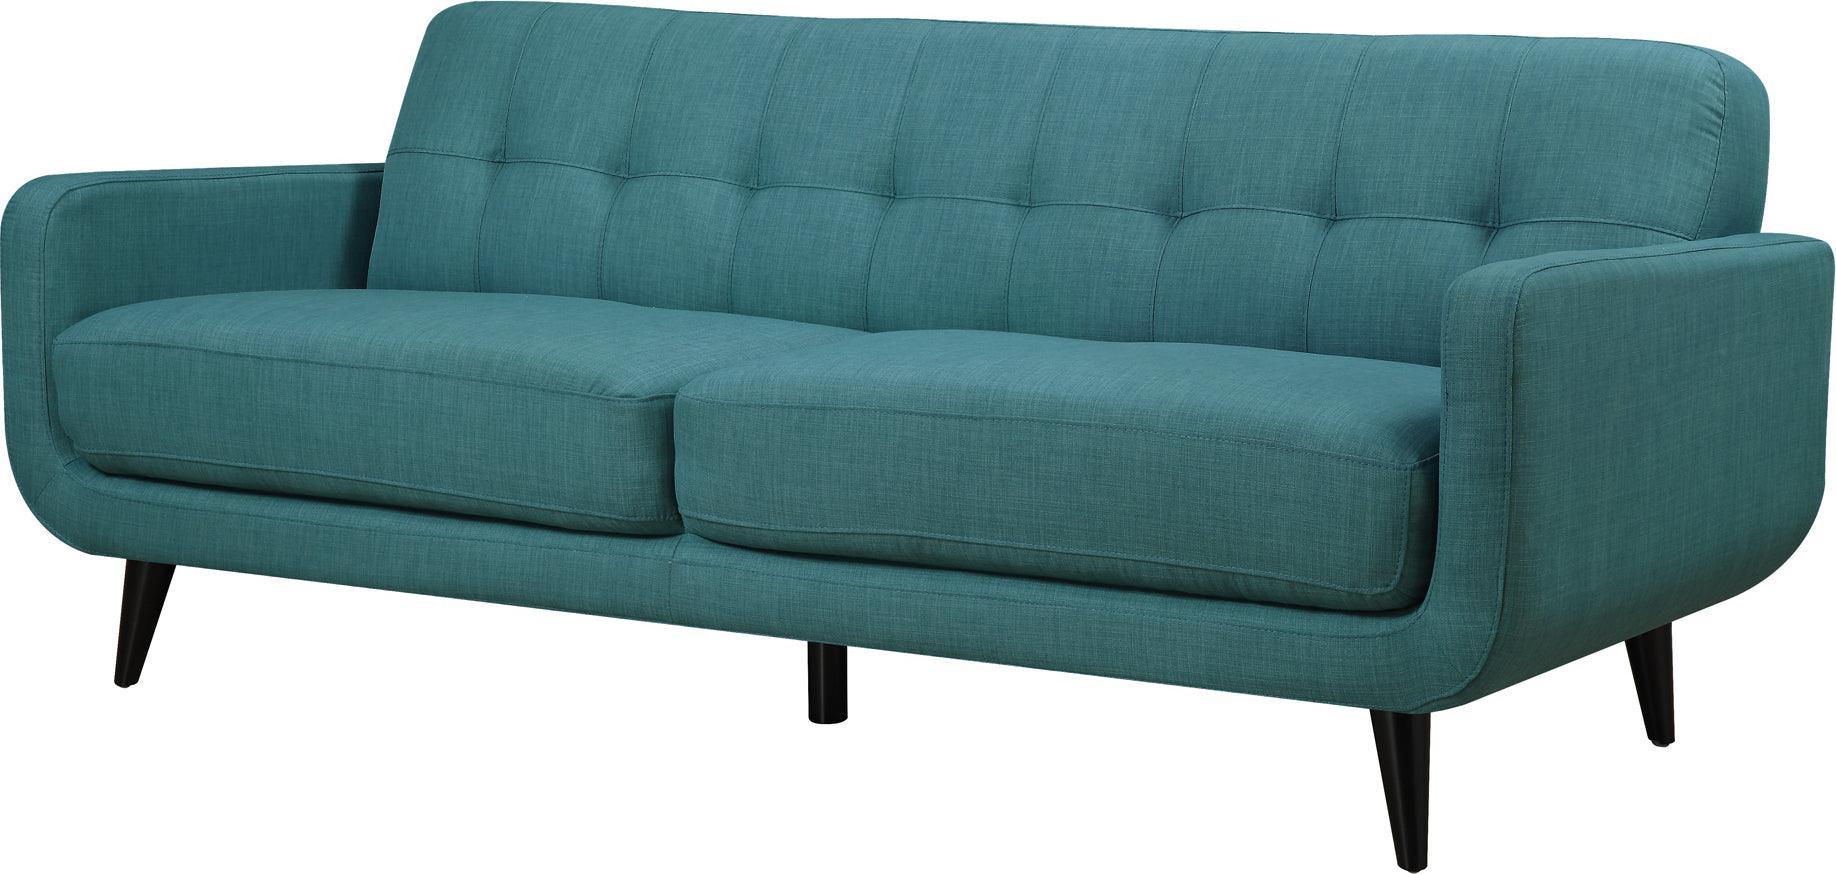 Elements Sofas & Couches - Hailey Sofa Teal